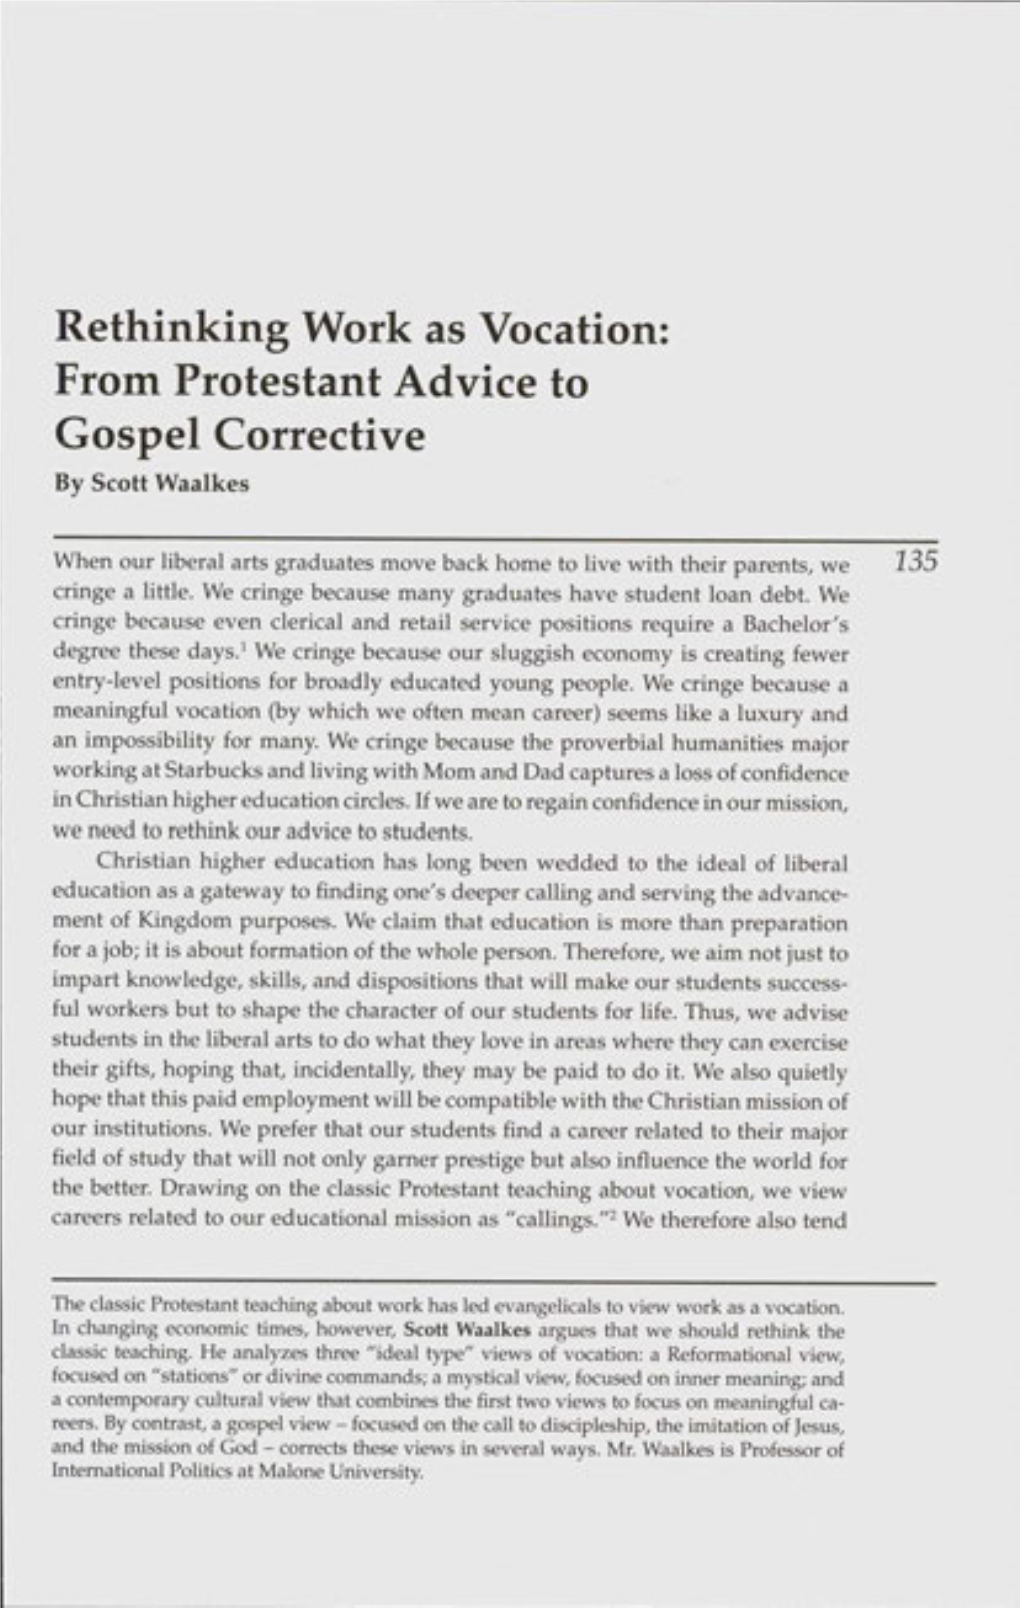 Rethinking Work As Vocation: from Protestant Advice to Gospel Corrective by Scott Waalkes